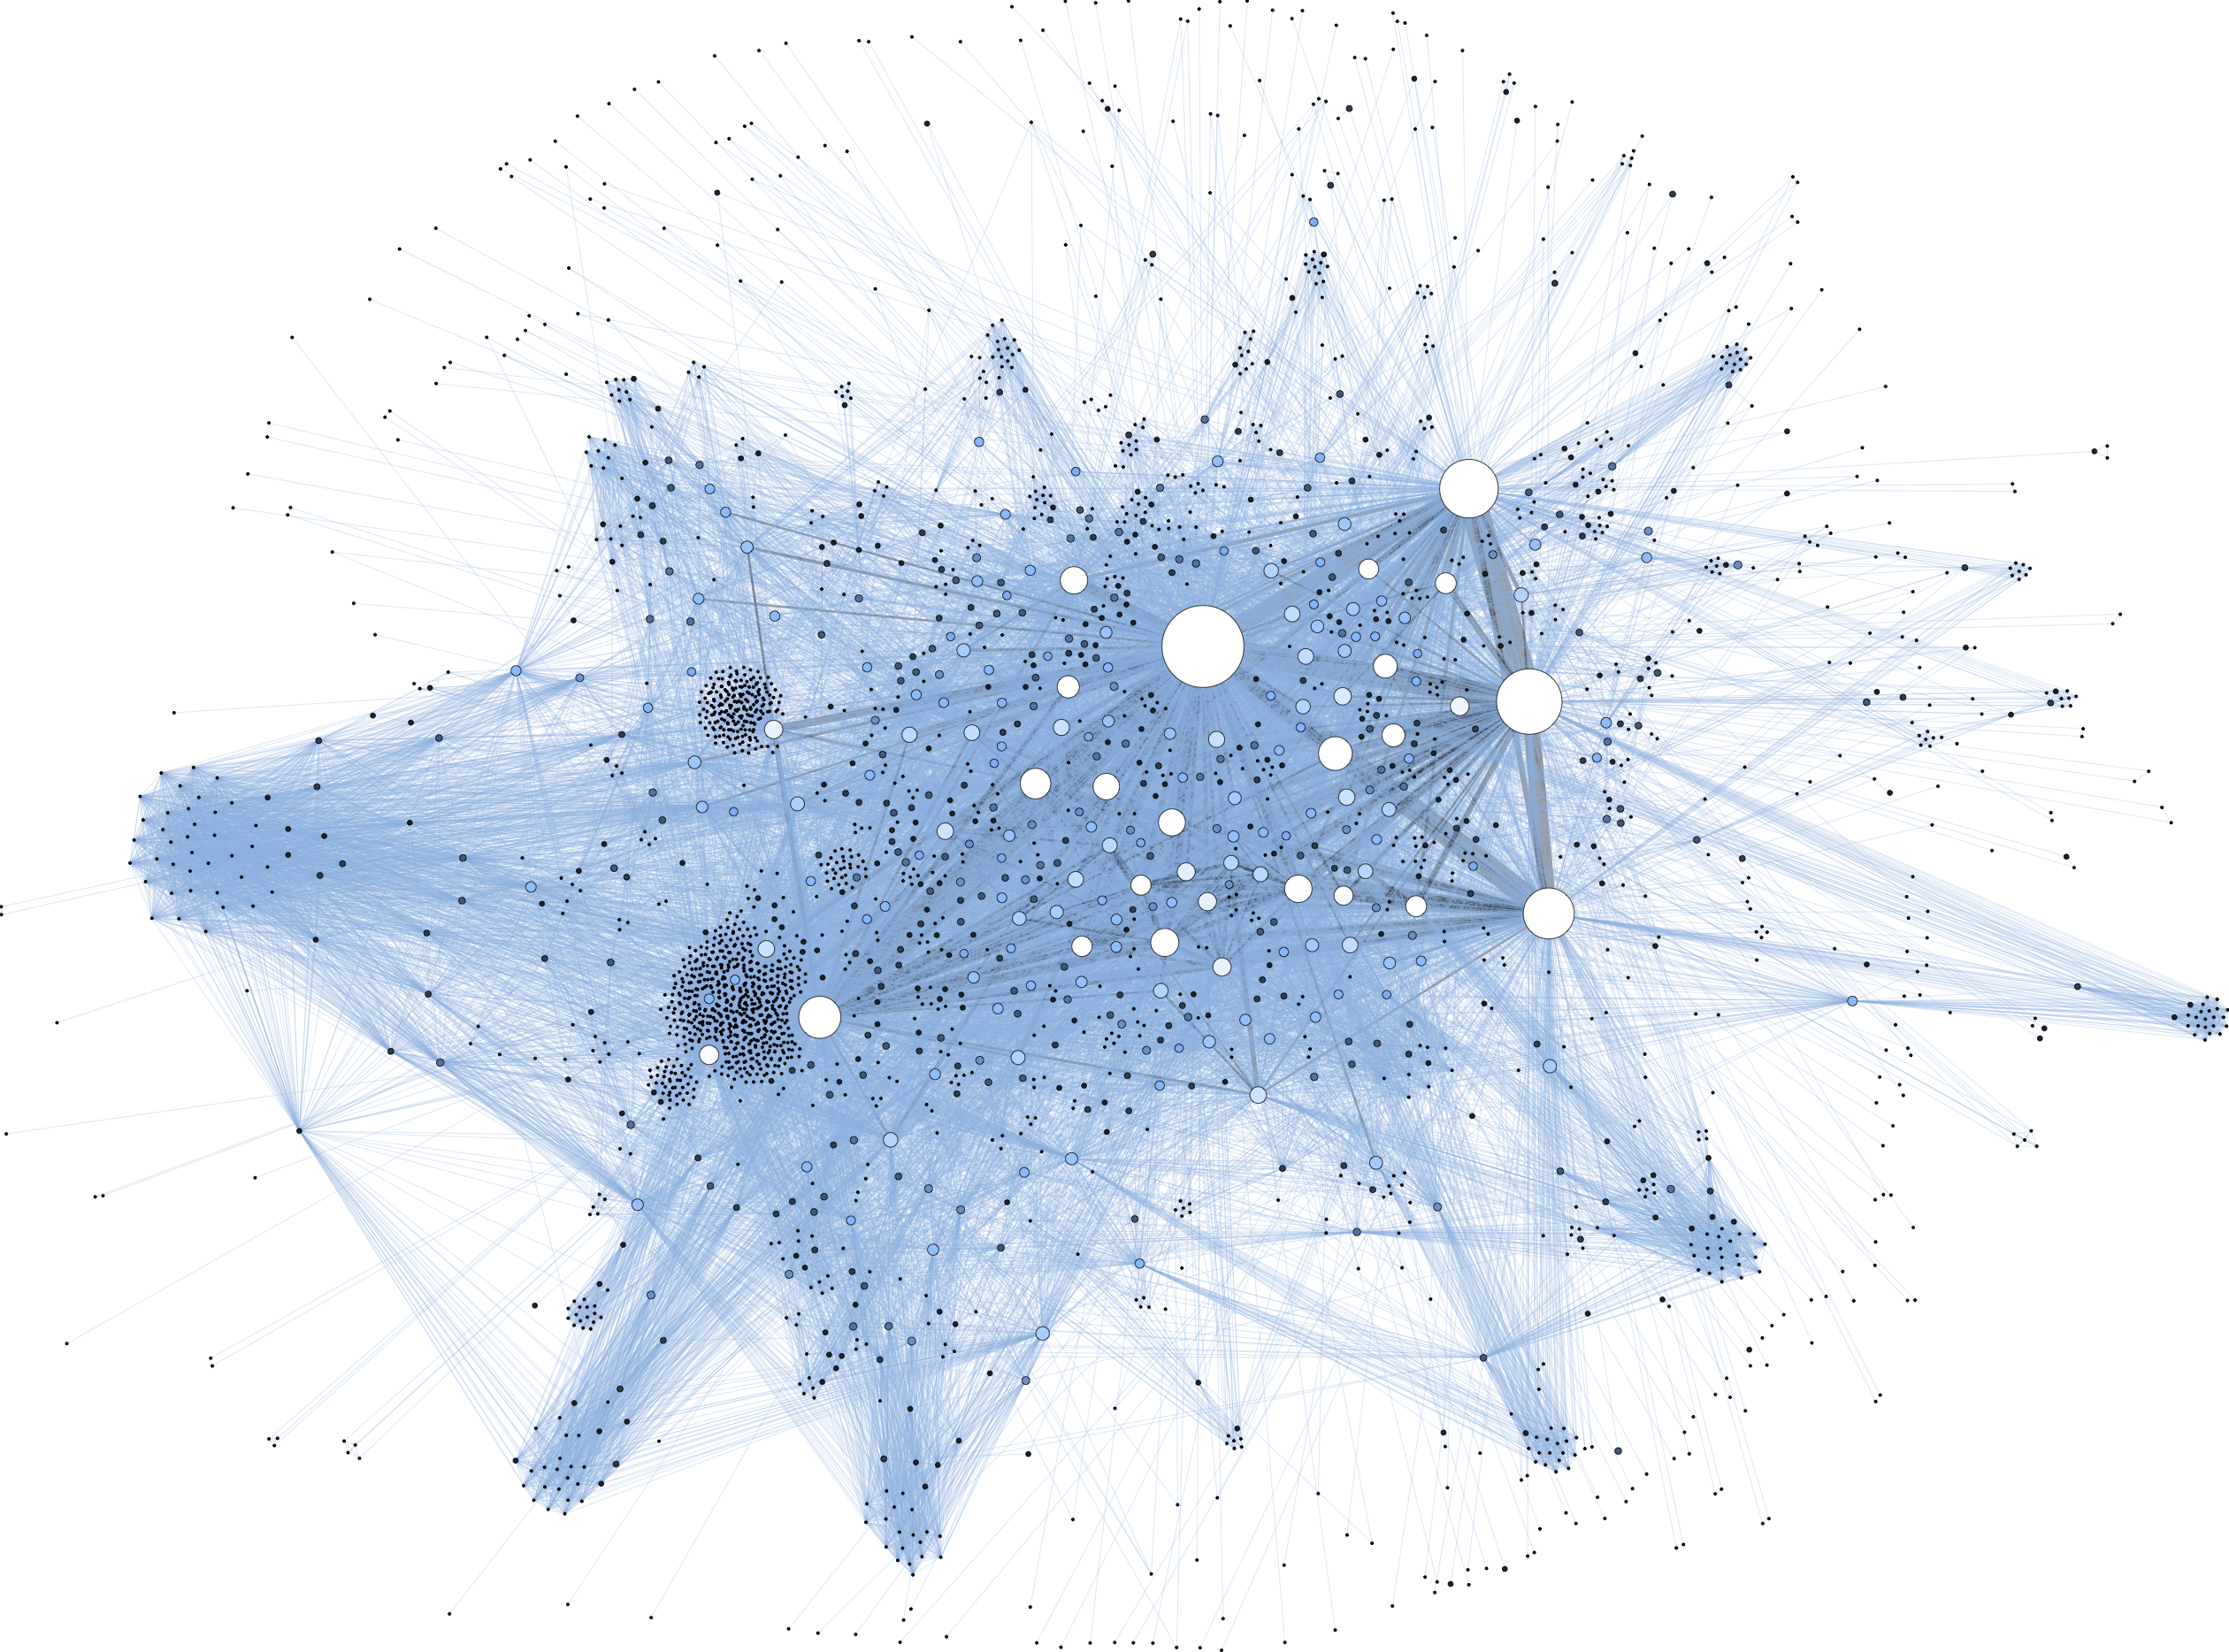 Figure 4. The network of the Intellectual Cooperation. 38.6K co-occurrences of 3.200 agents of the documents in the League of Nations’ Intellectual Cooperation archives (1919-1927, 27K documents).